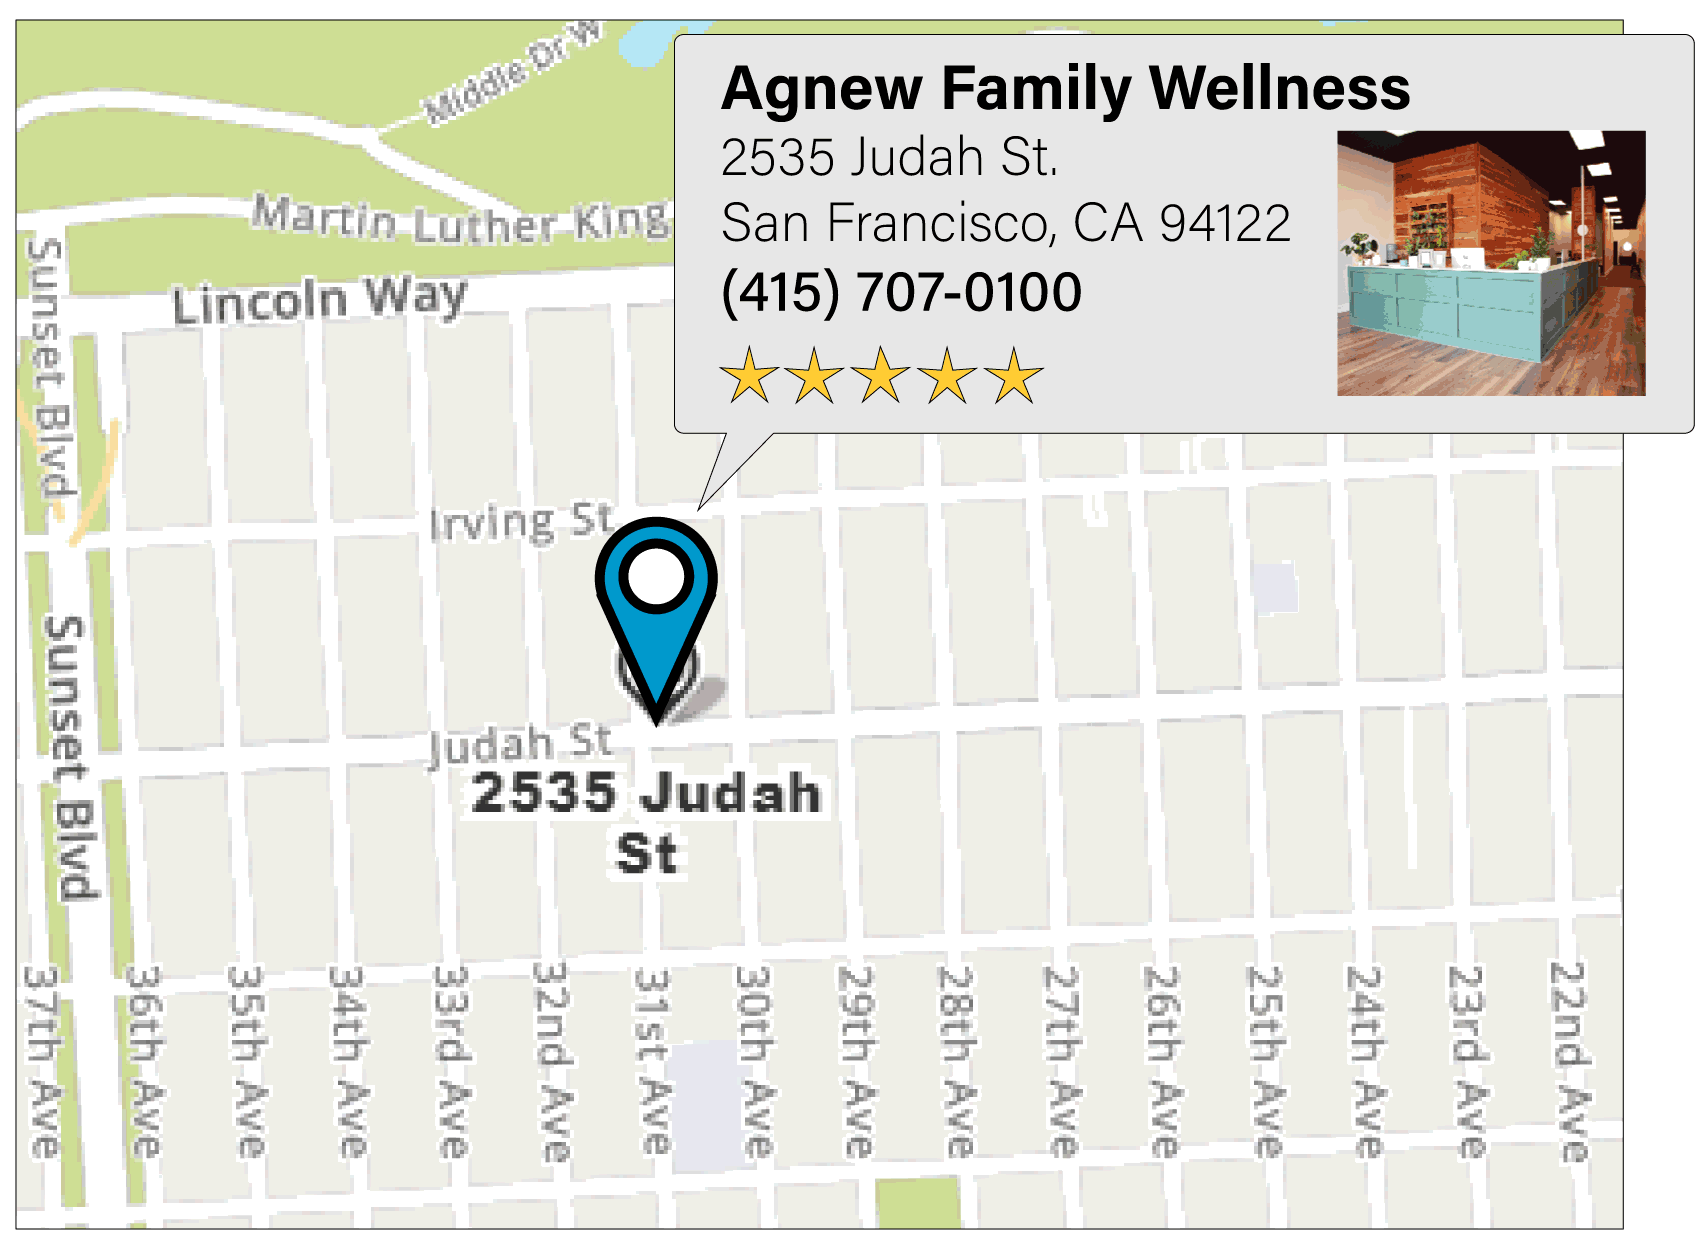 Agnew Family Wellness's location on google map